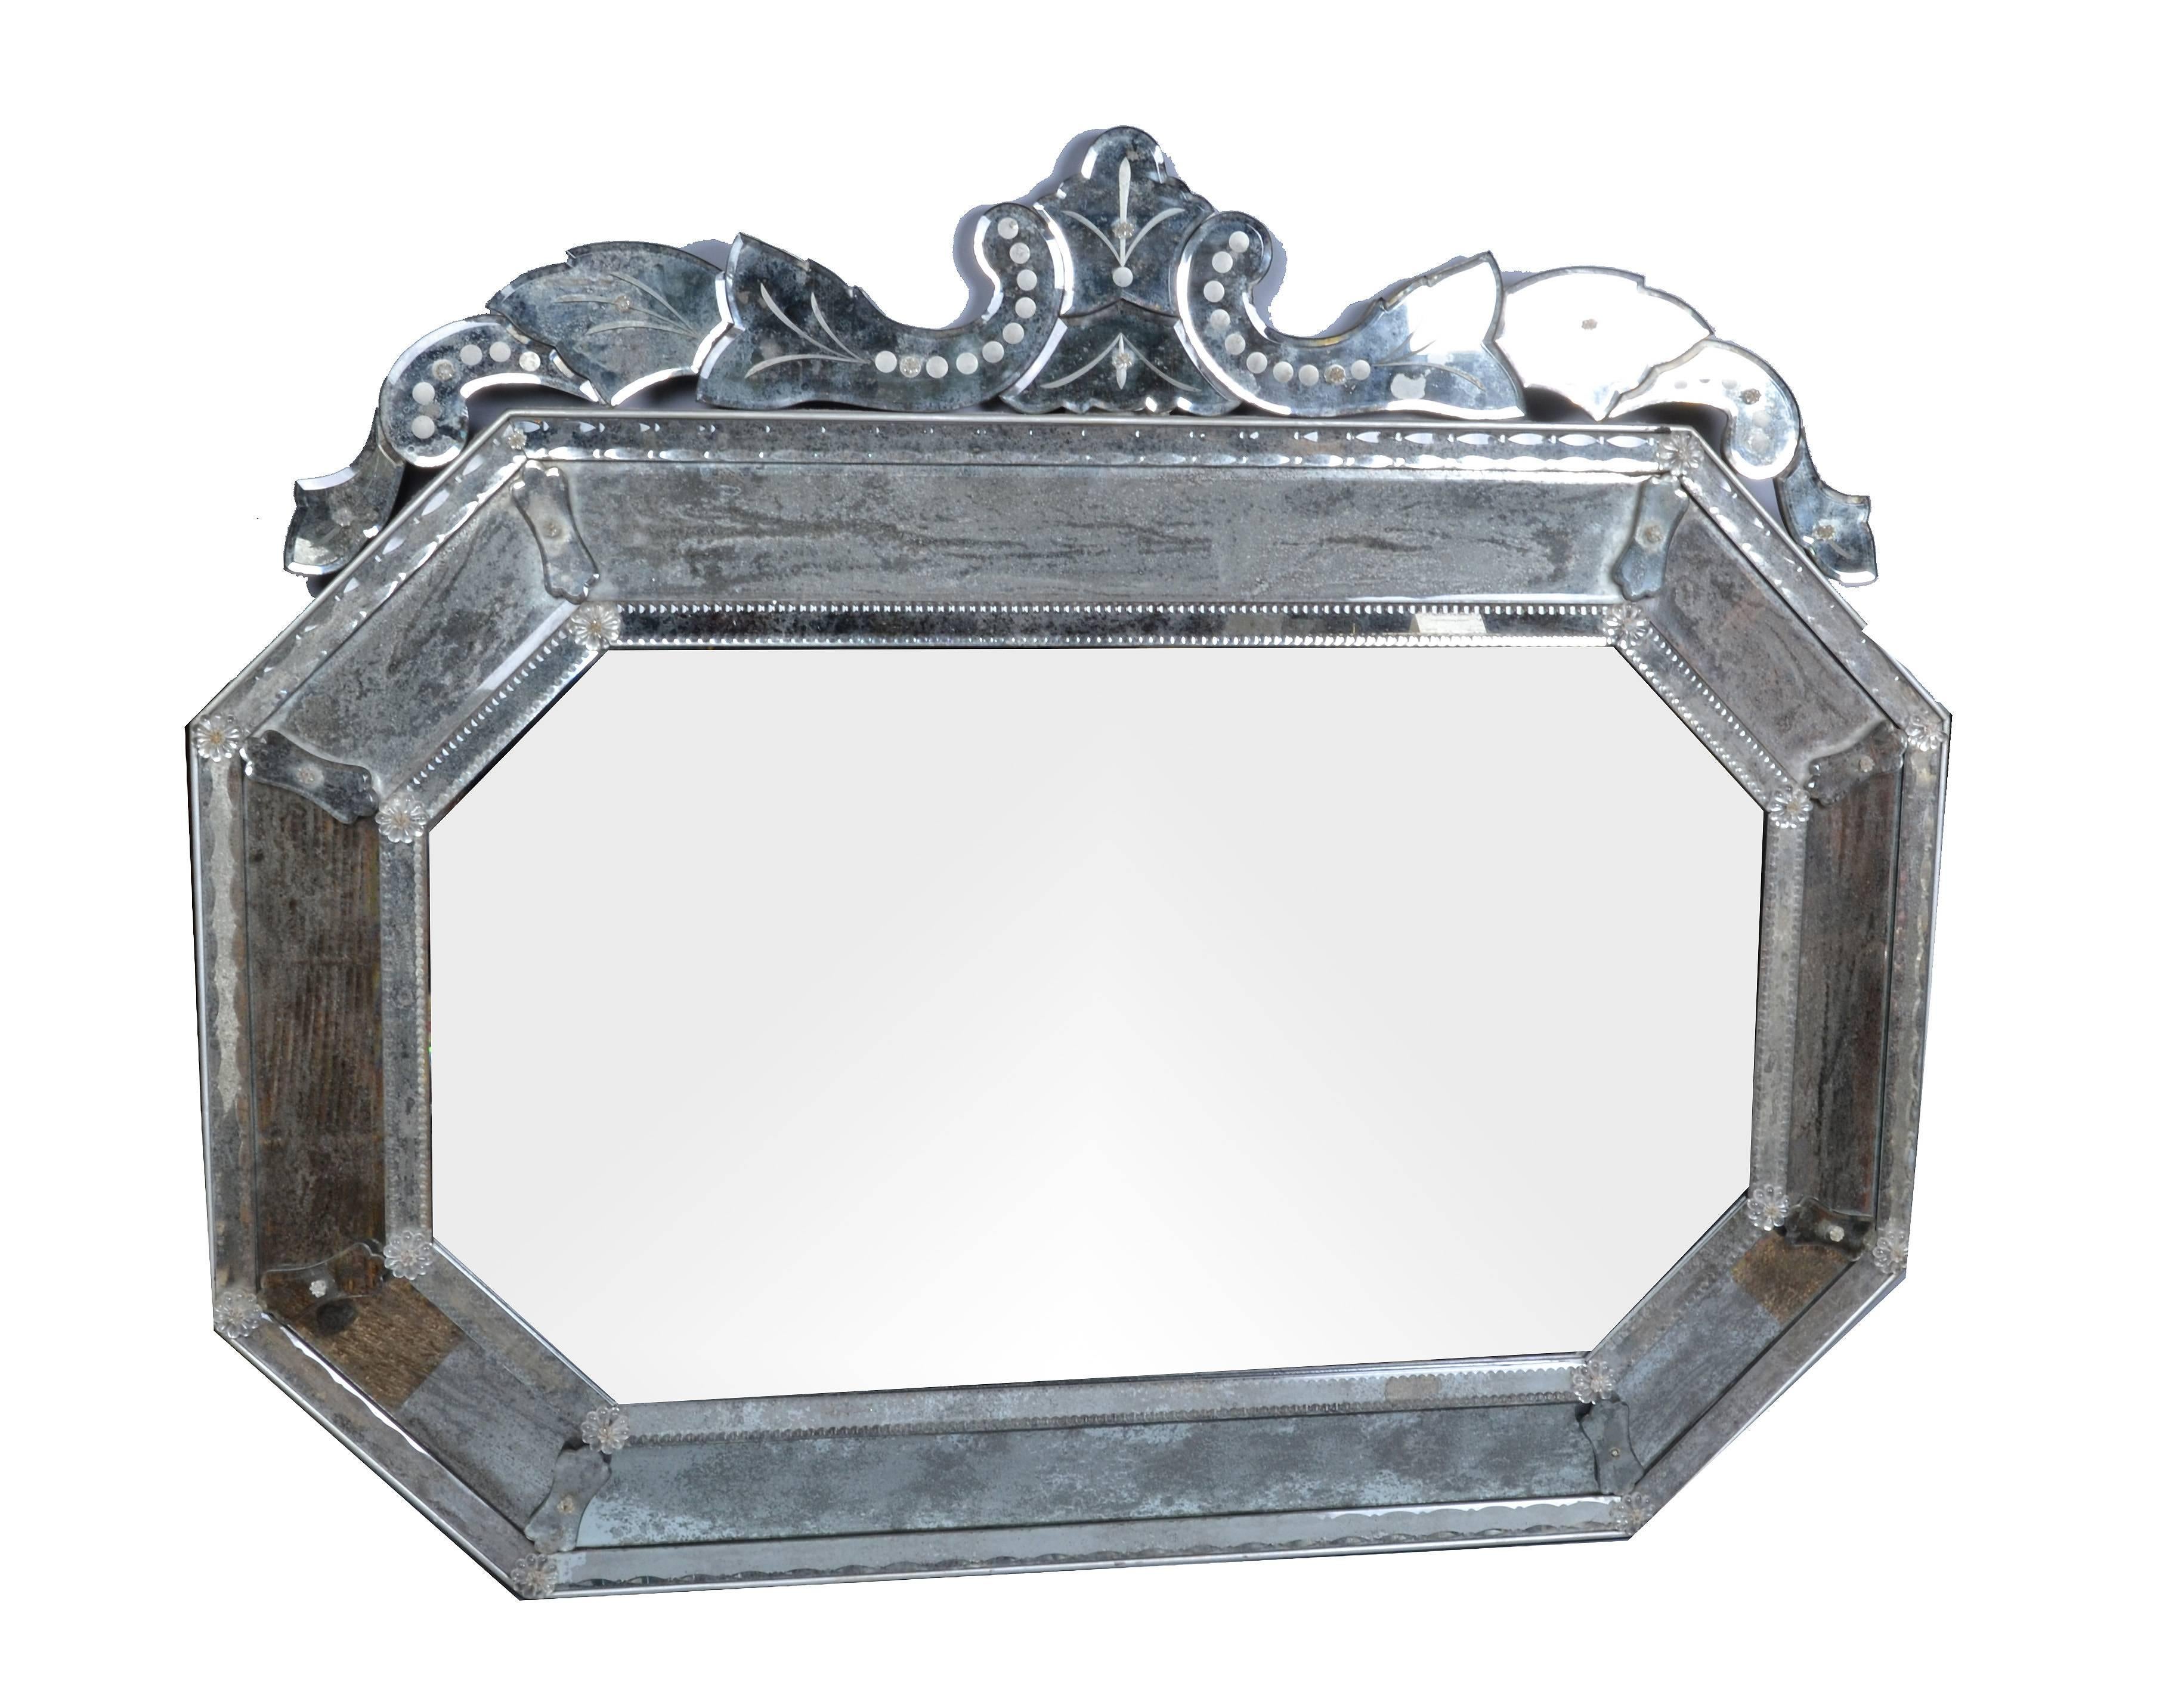 Venetian wall mirror with Bohemian flowers and ornaments.
The mirror glass is beveled.
Can be hung vertical.